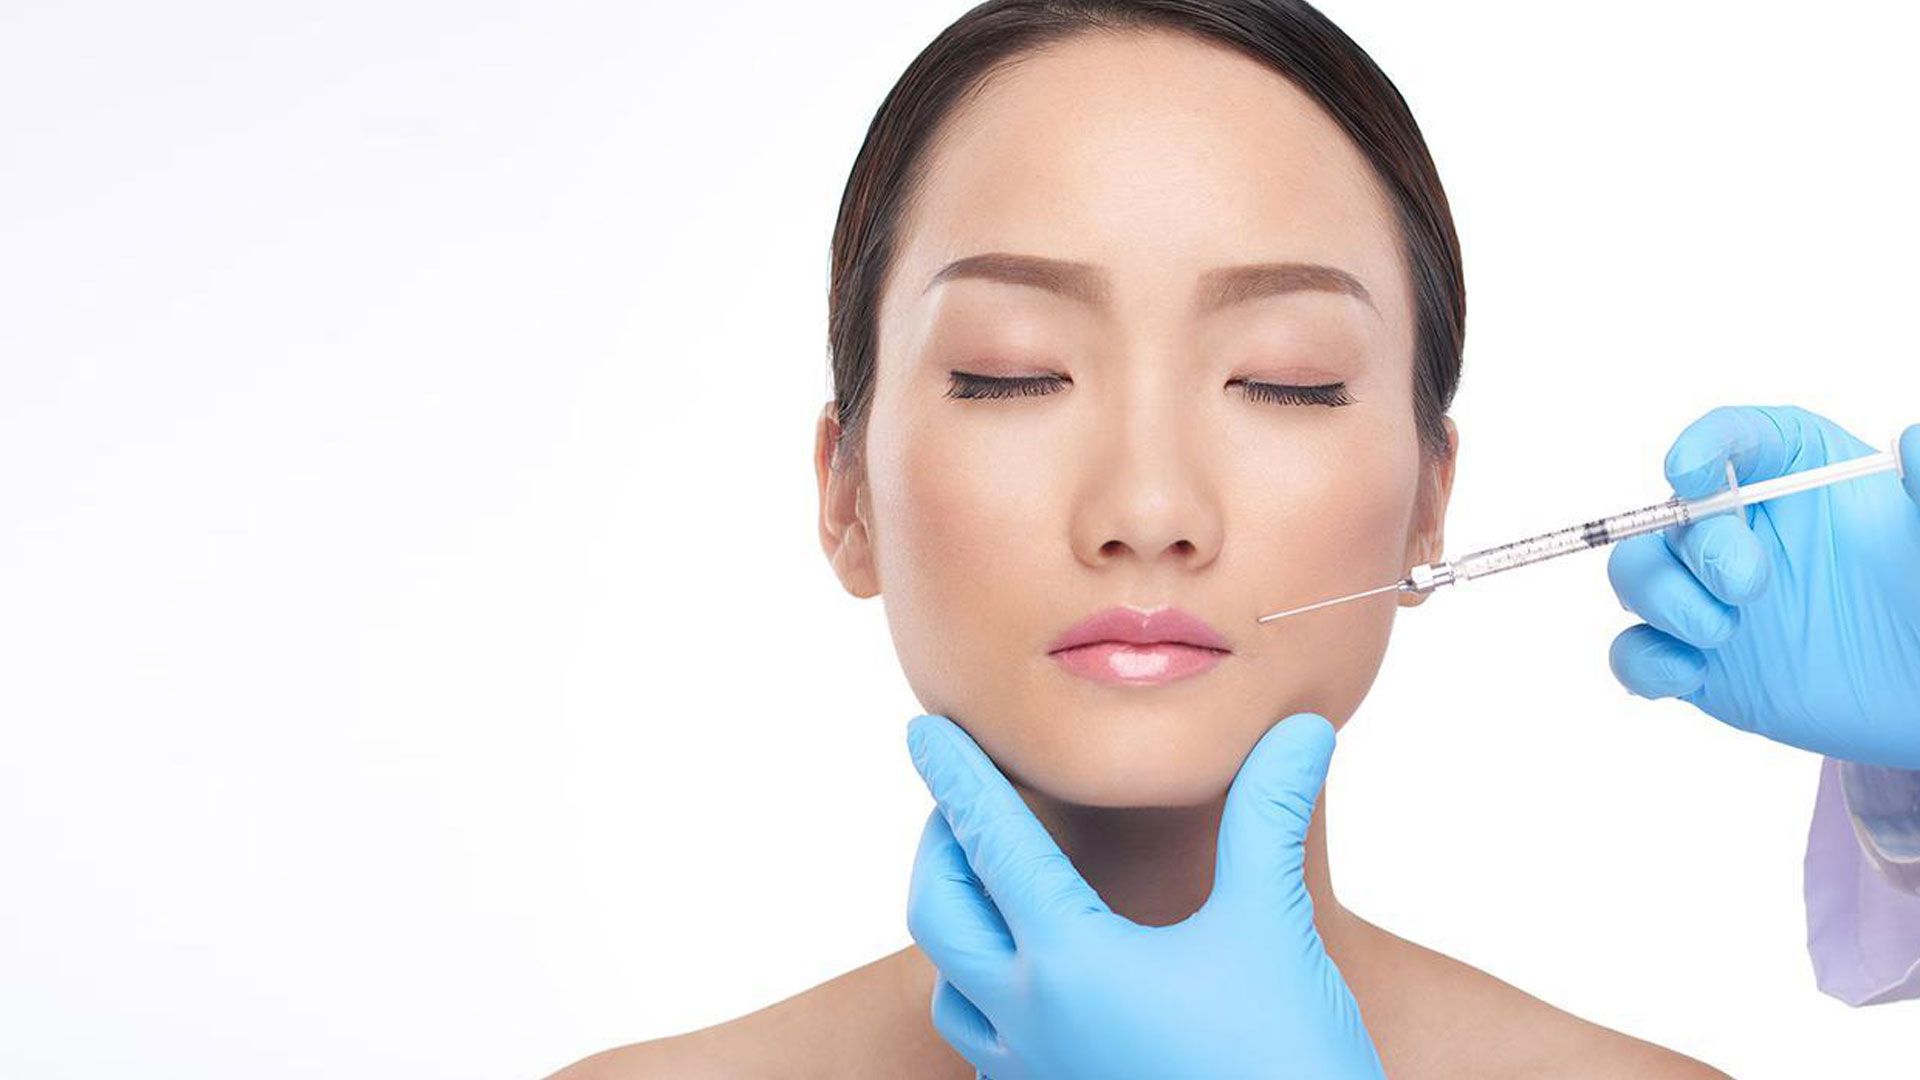 Injectables like Botox, Xeomin and Fillers at Salud Med Spa